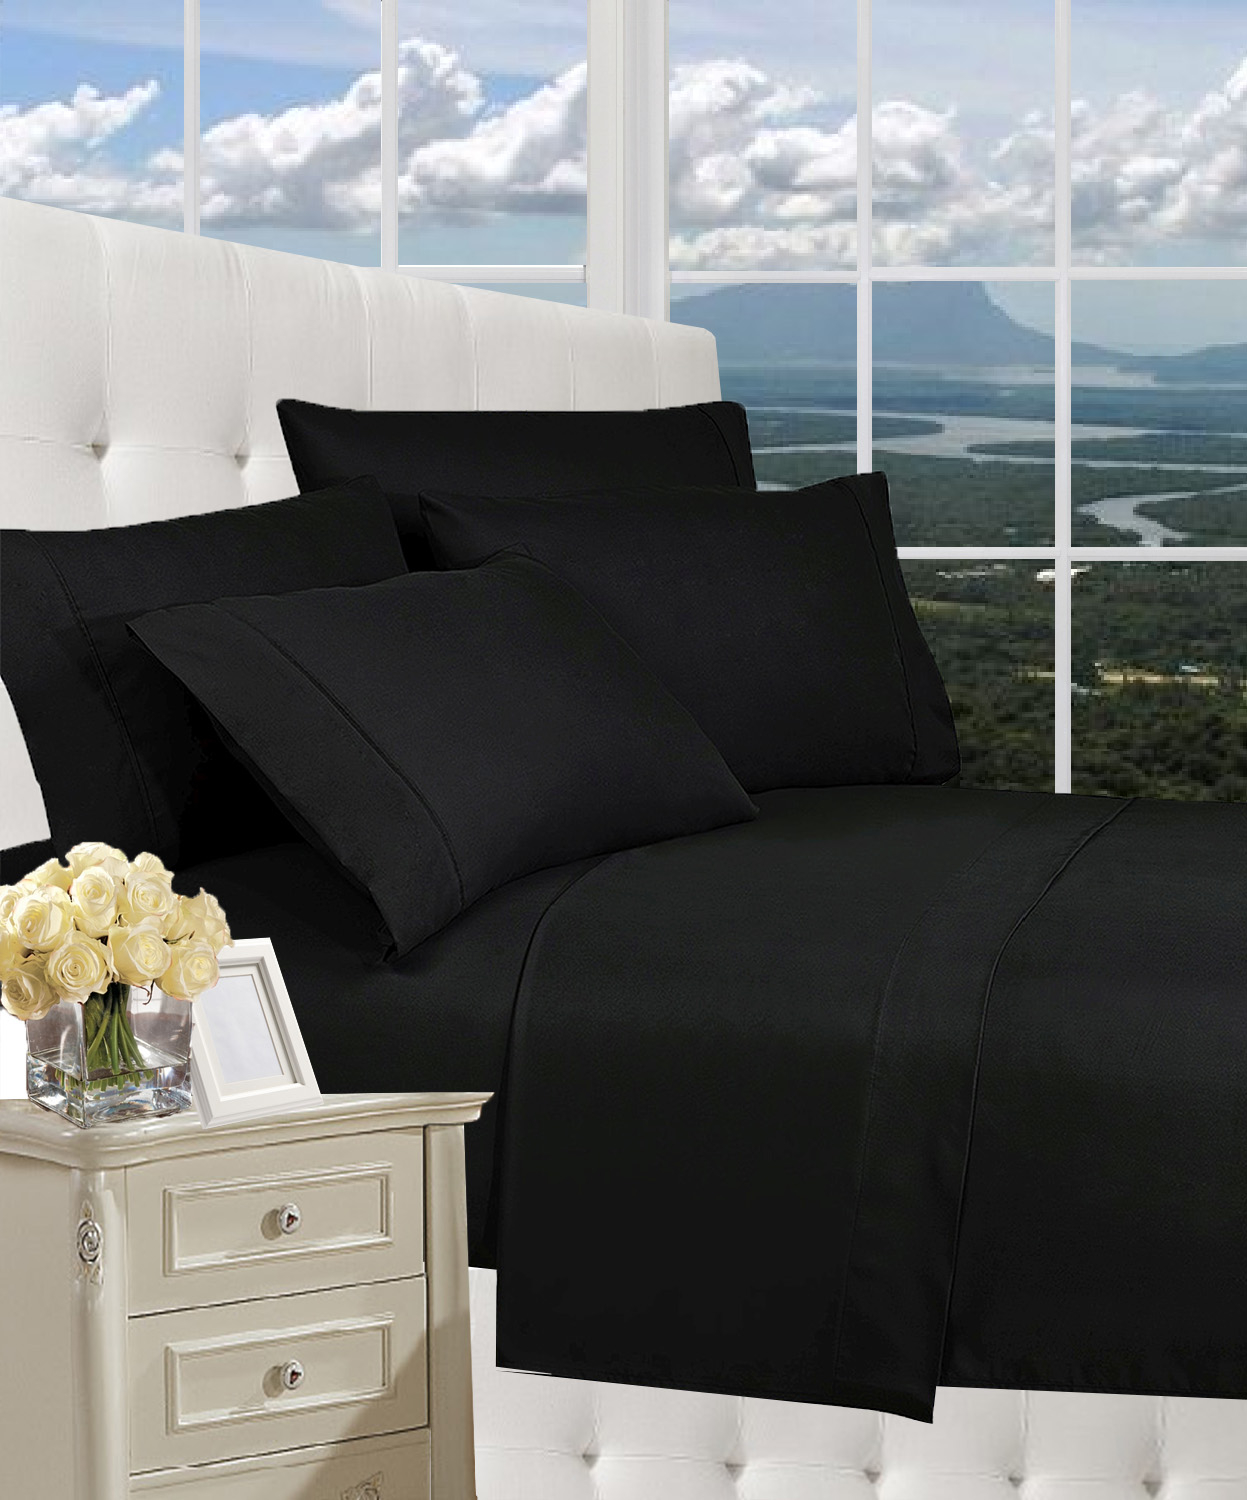 Elegant Comfort 1800 Series Wrinkle Resistant Egyptian Quality Hypoallergenic Ultra Soft Luxury 3-piece Bed Sheet Set, Twin, Black